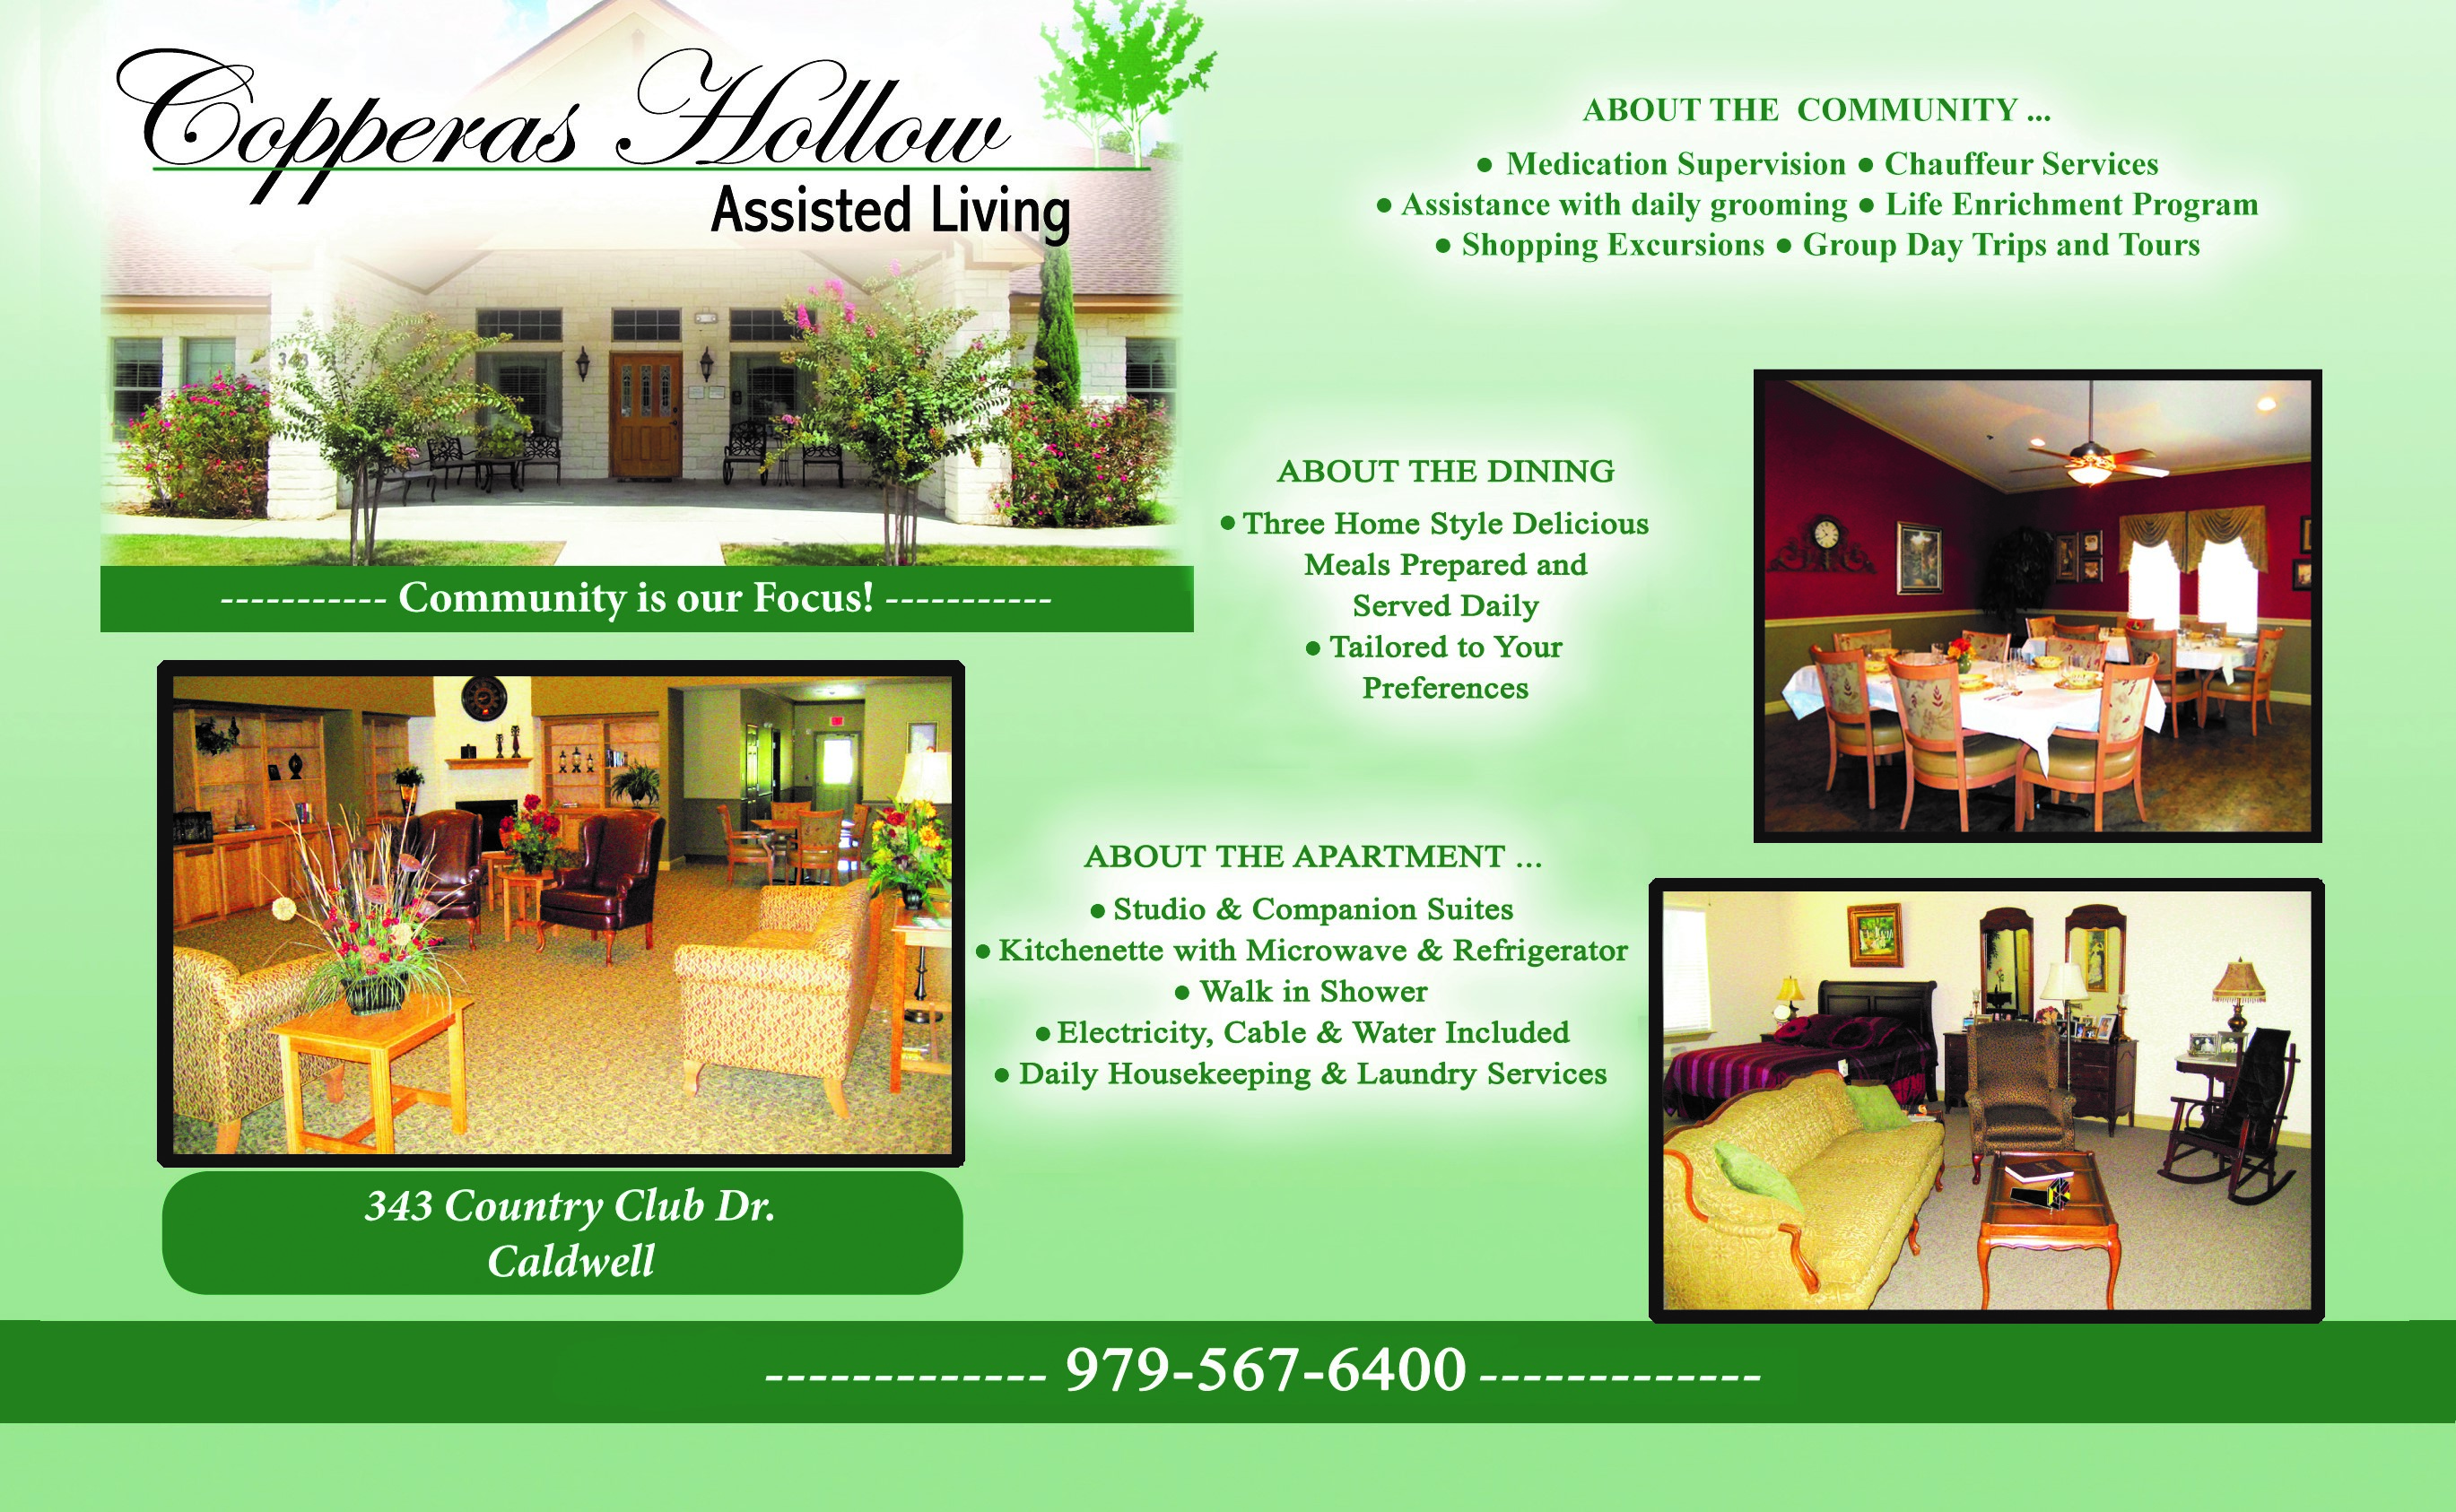 Copperas Hollow Assisted Living